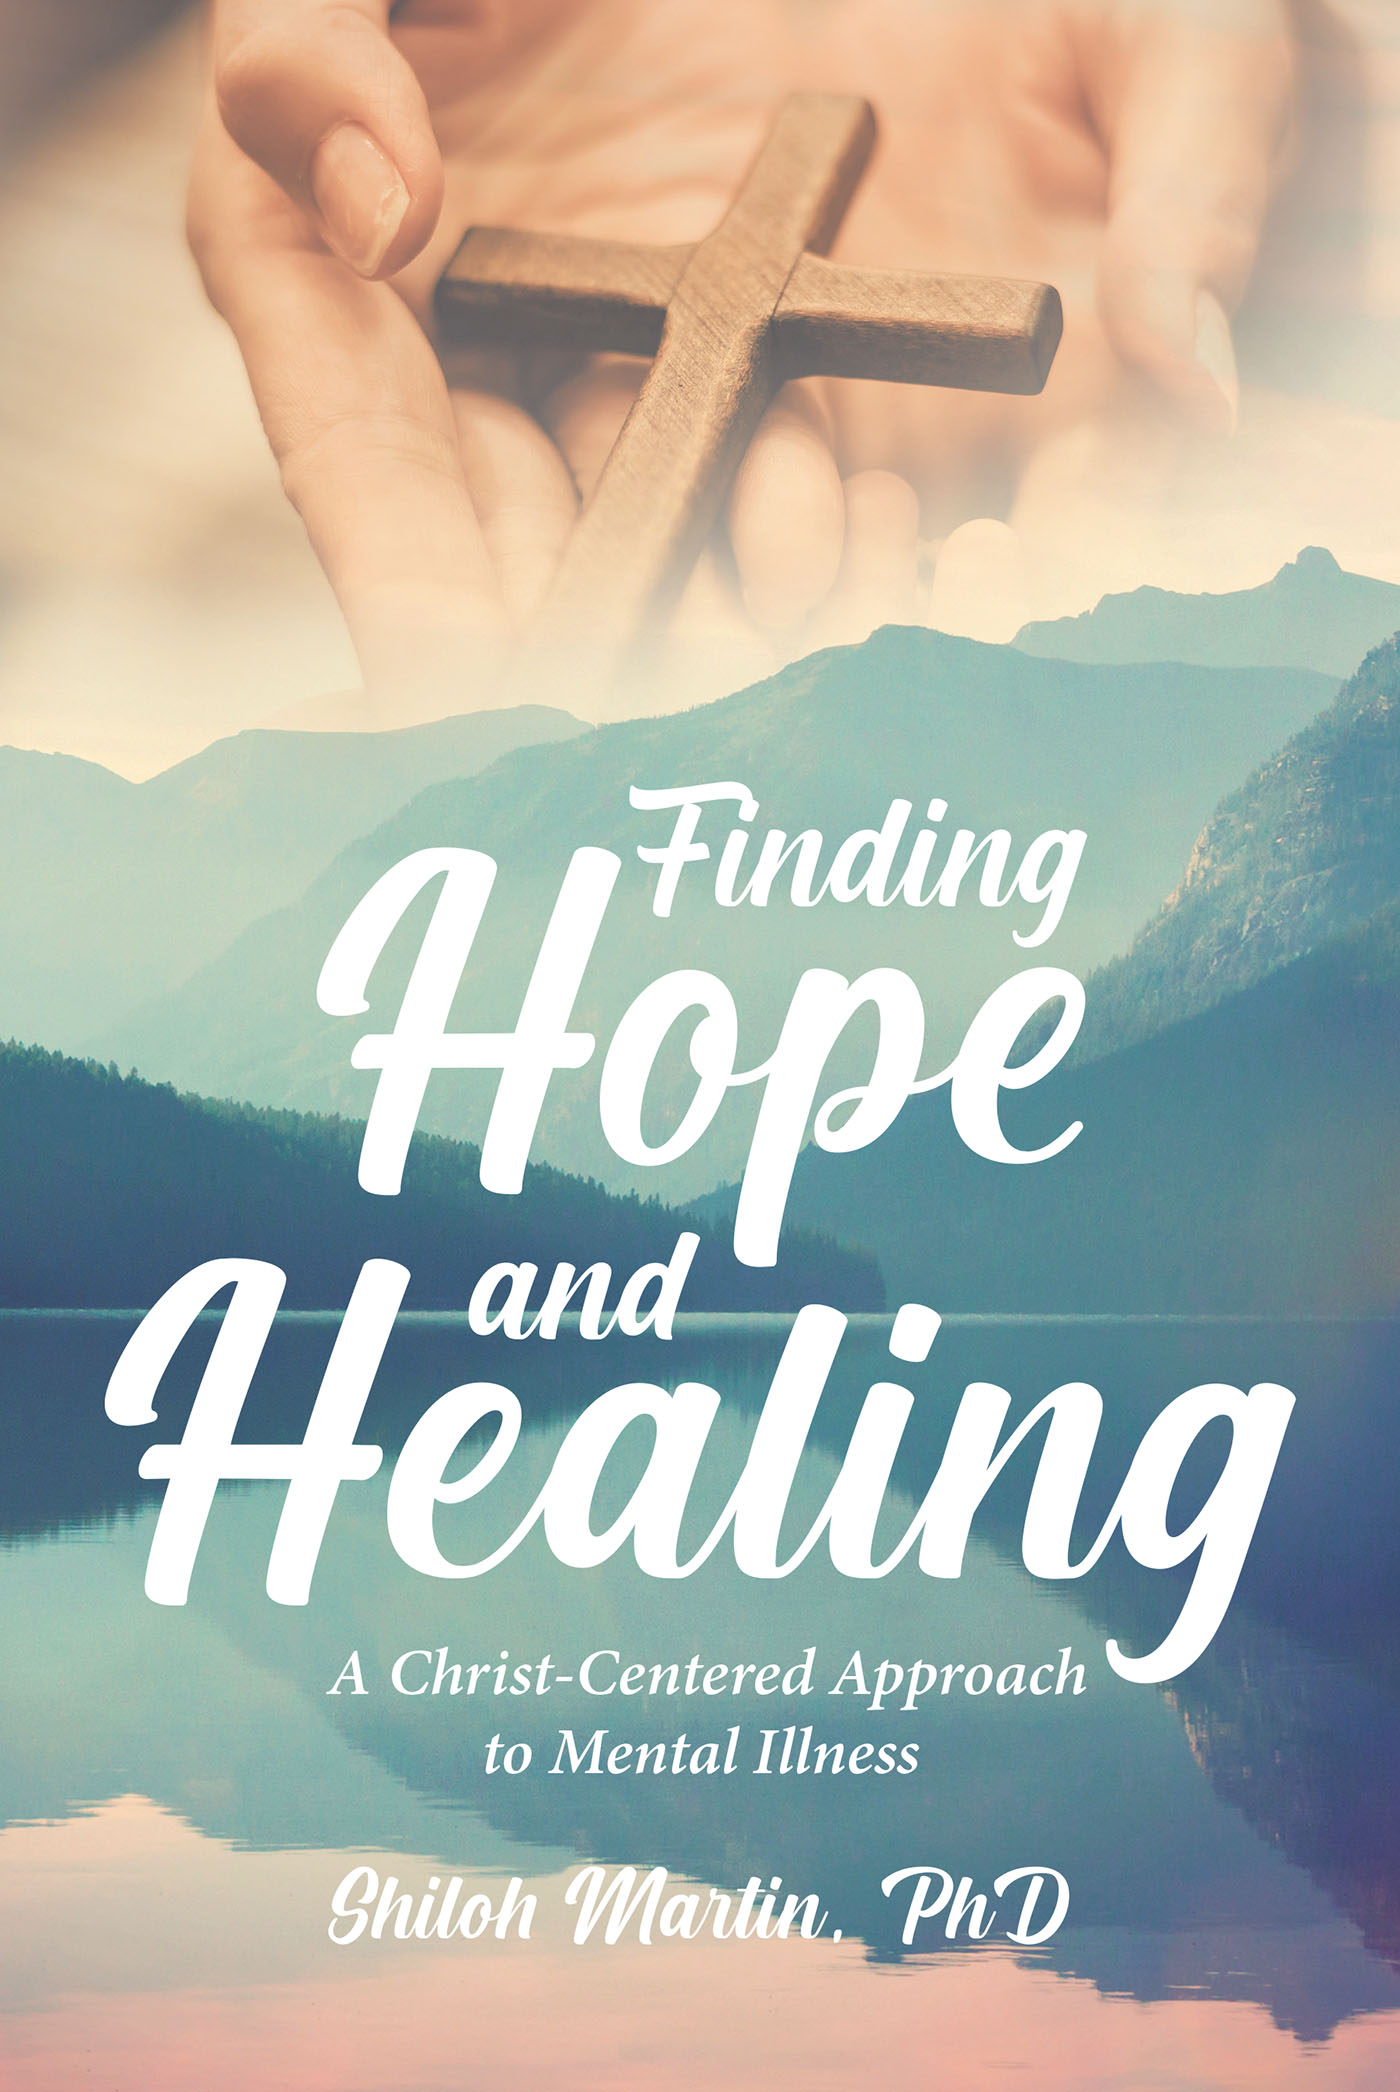 Author Shiloh Martin, PhD’s New Book, “Finding Hope and Healing,” Aims to Provide a New, Christian Perspective to How One Understands Mental Health Issues